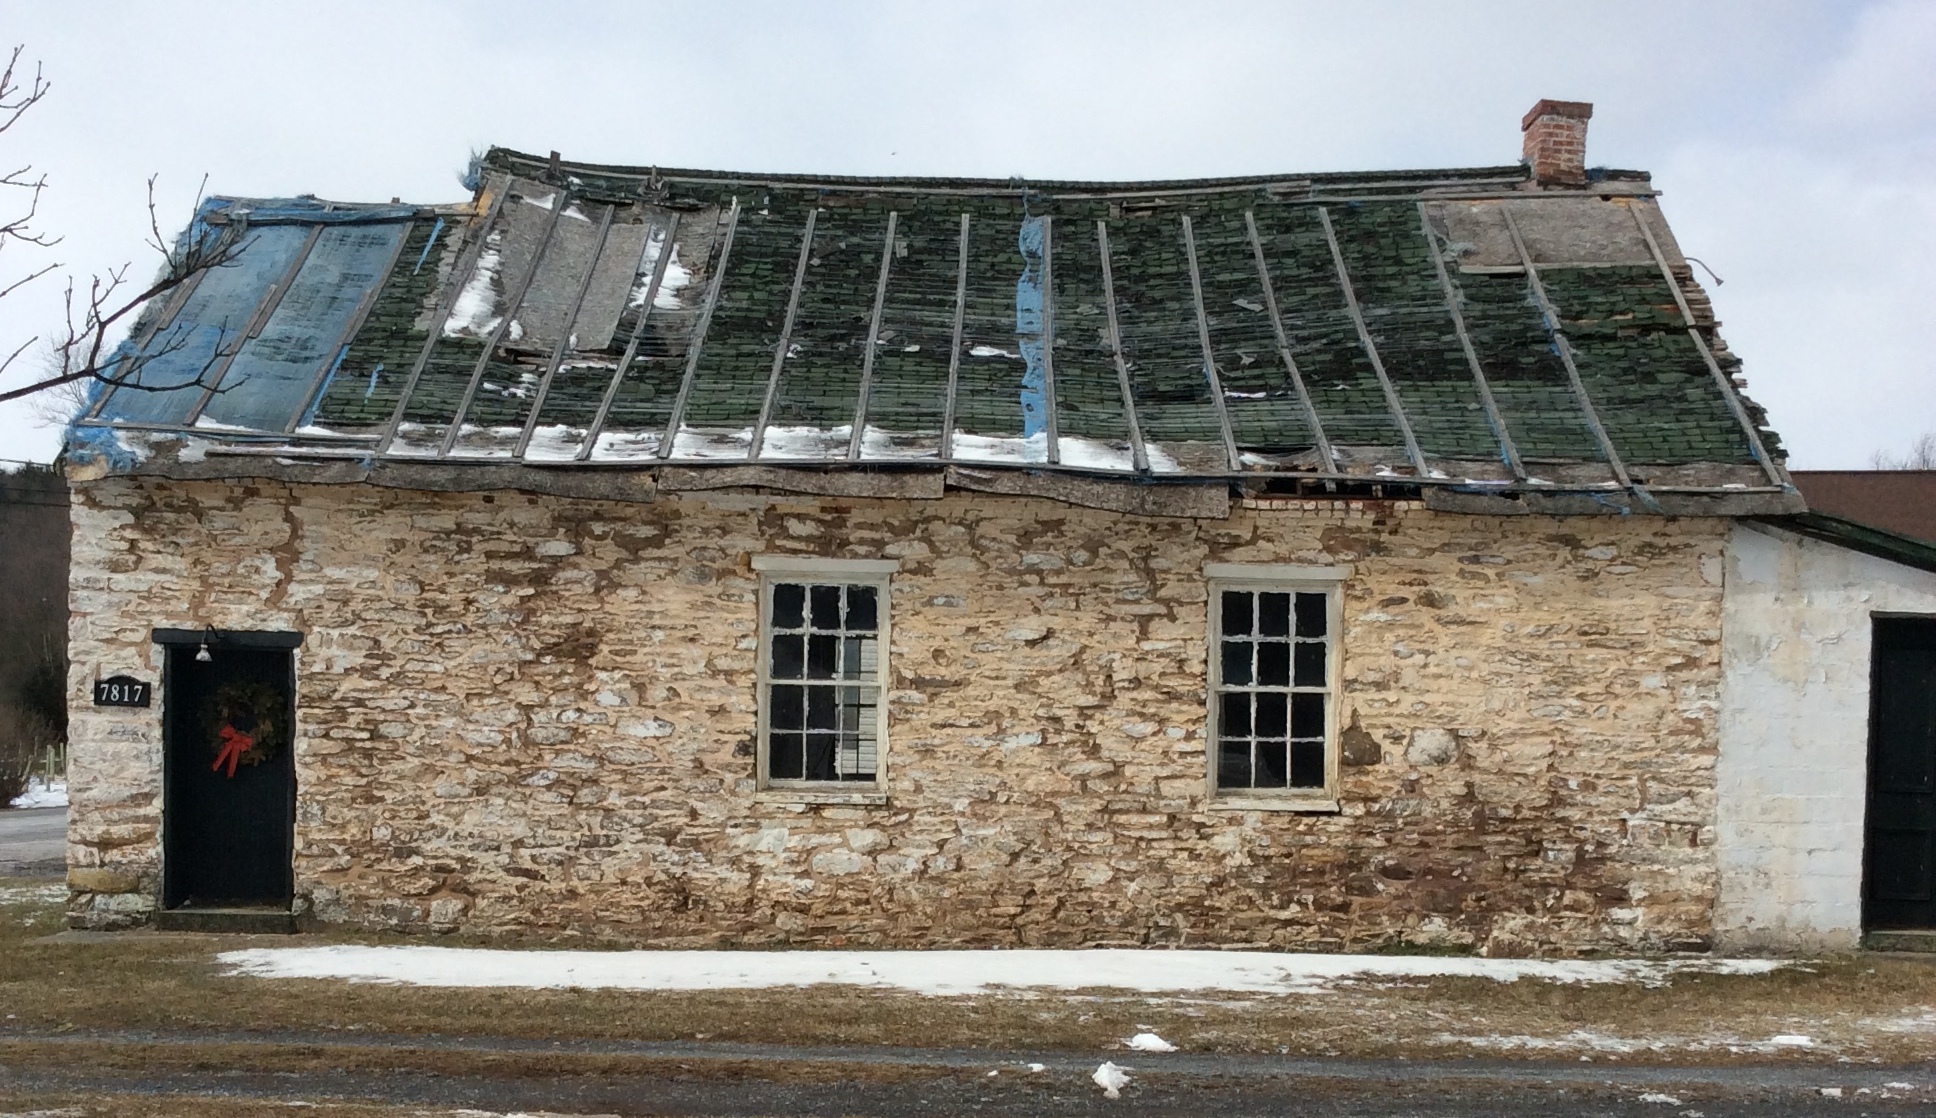 The roof and stone walls of the Rocky Spring Schoolhouse are obviously sloping, in need of repair.